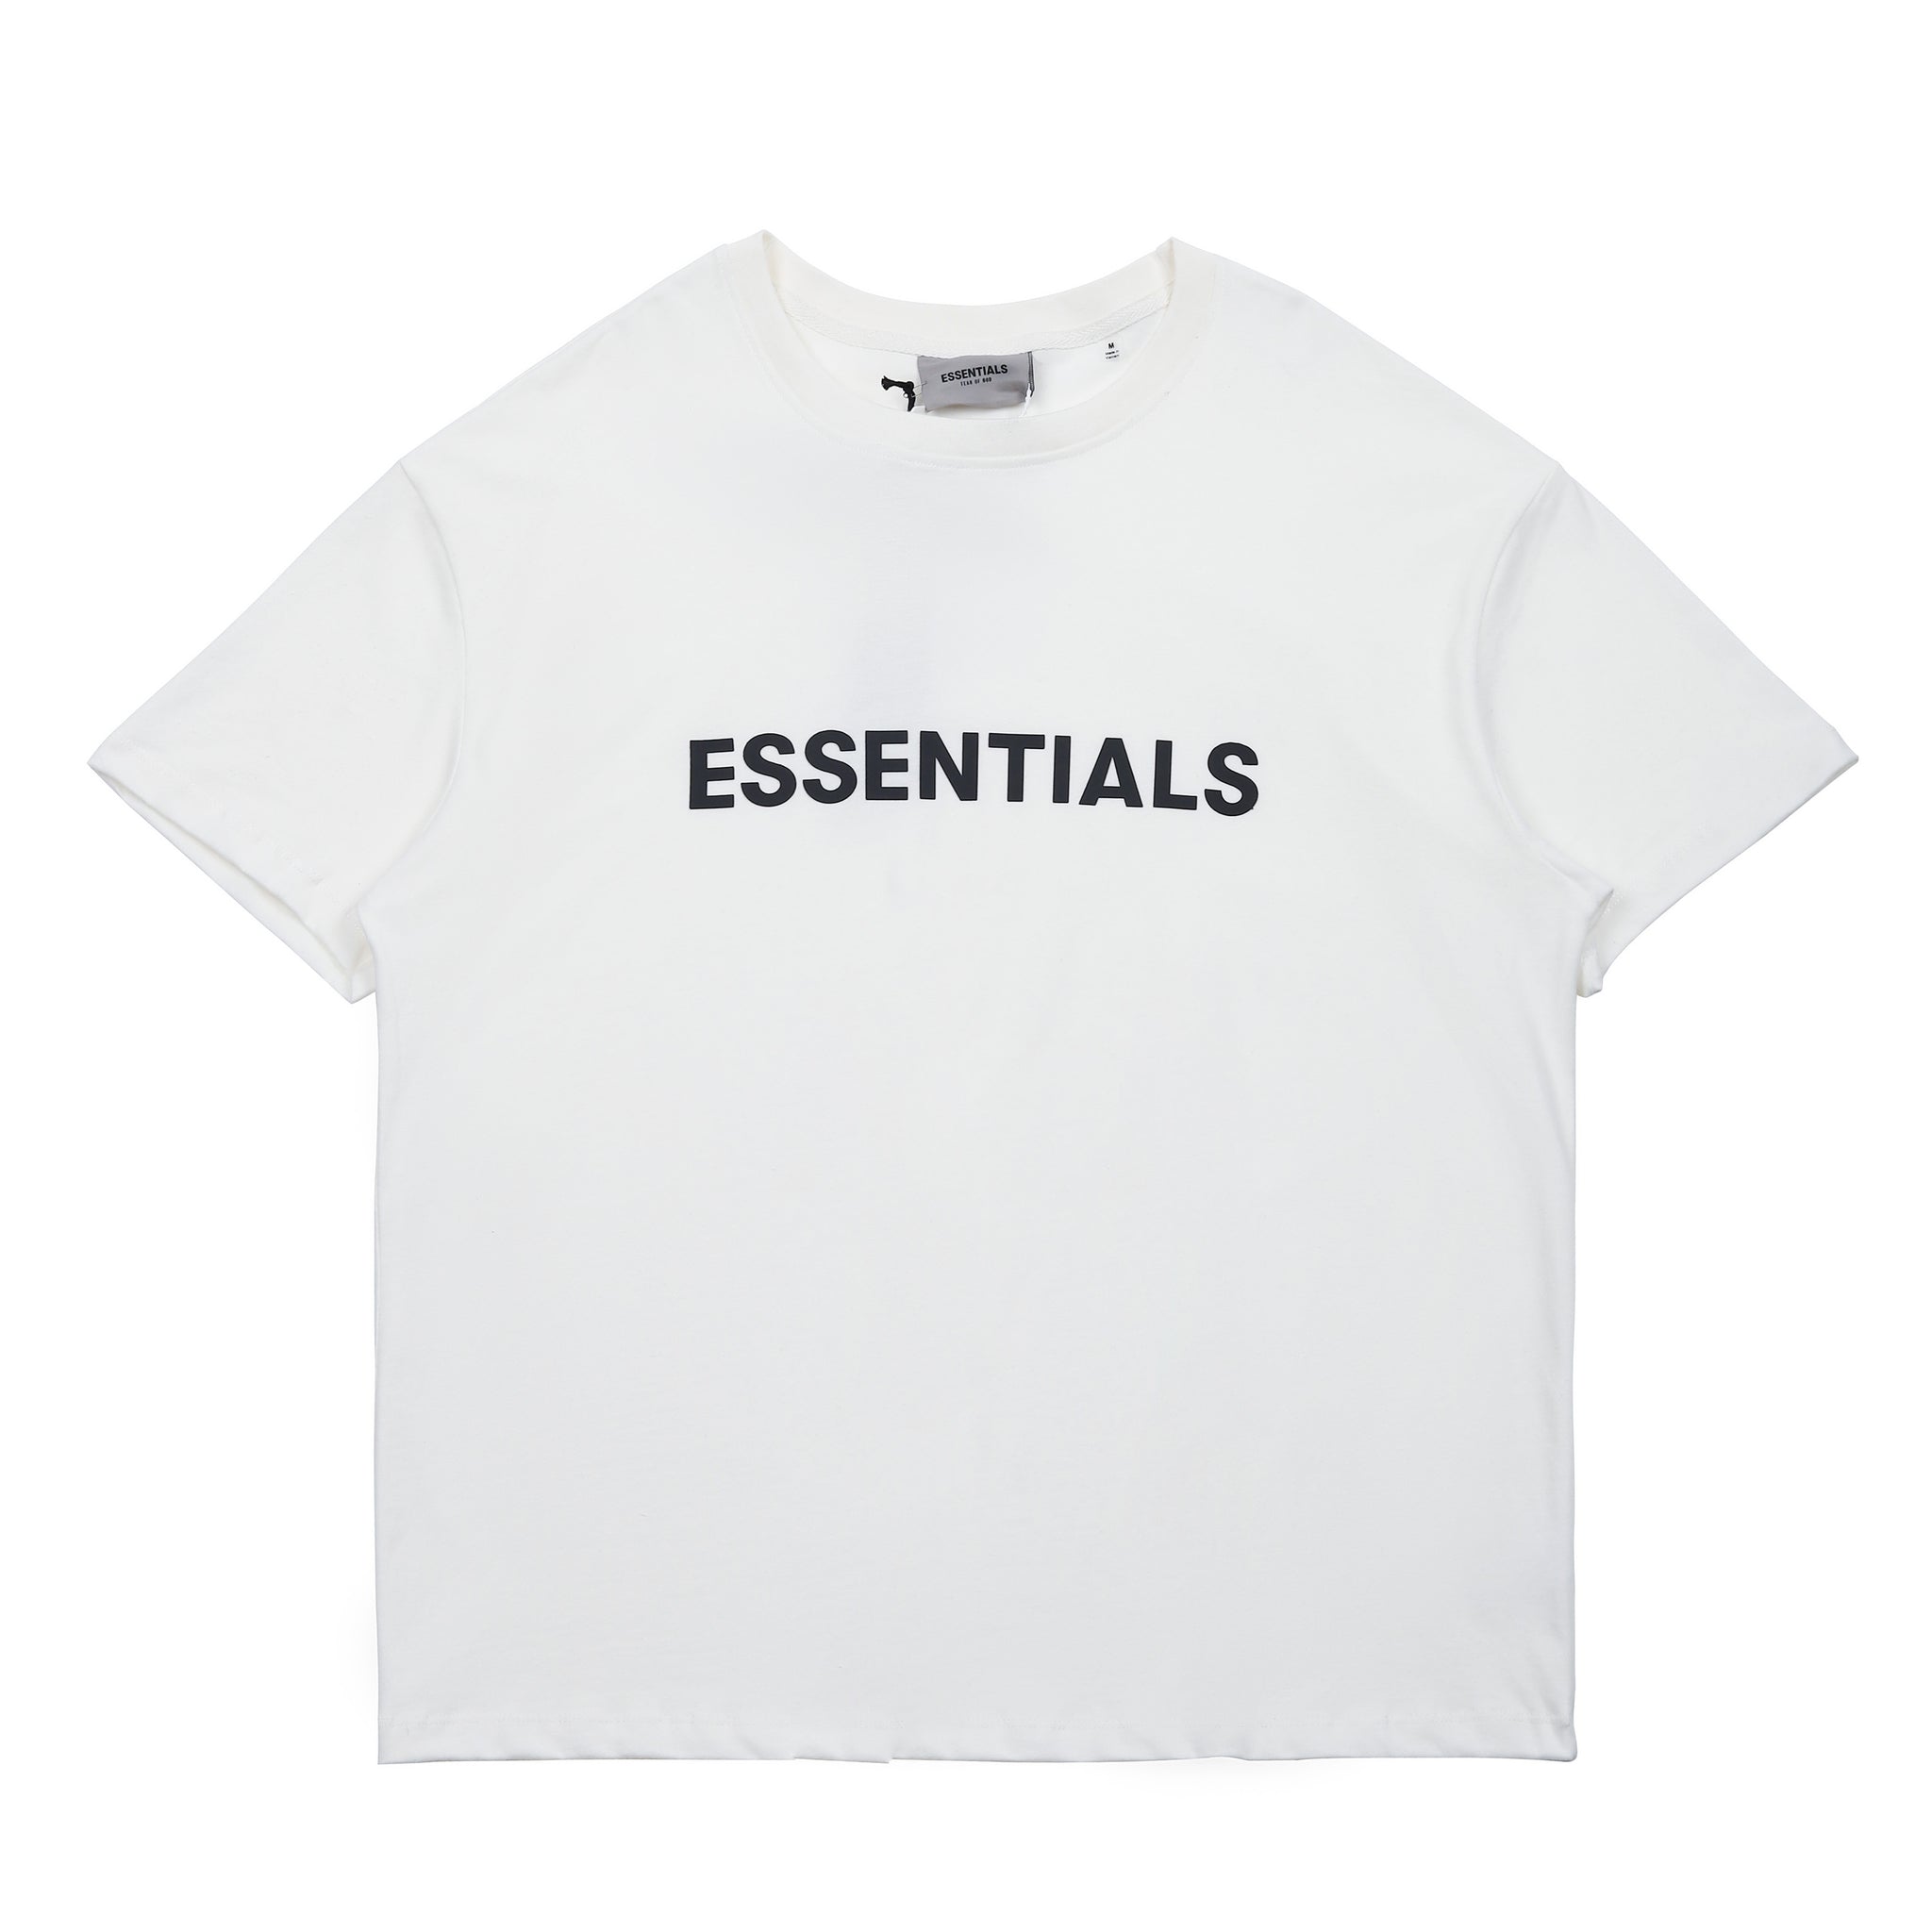 Fear Of God Essentials Oversized Tee